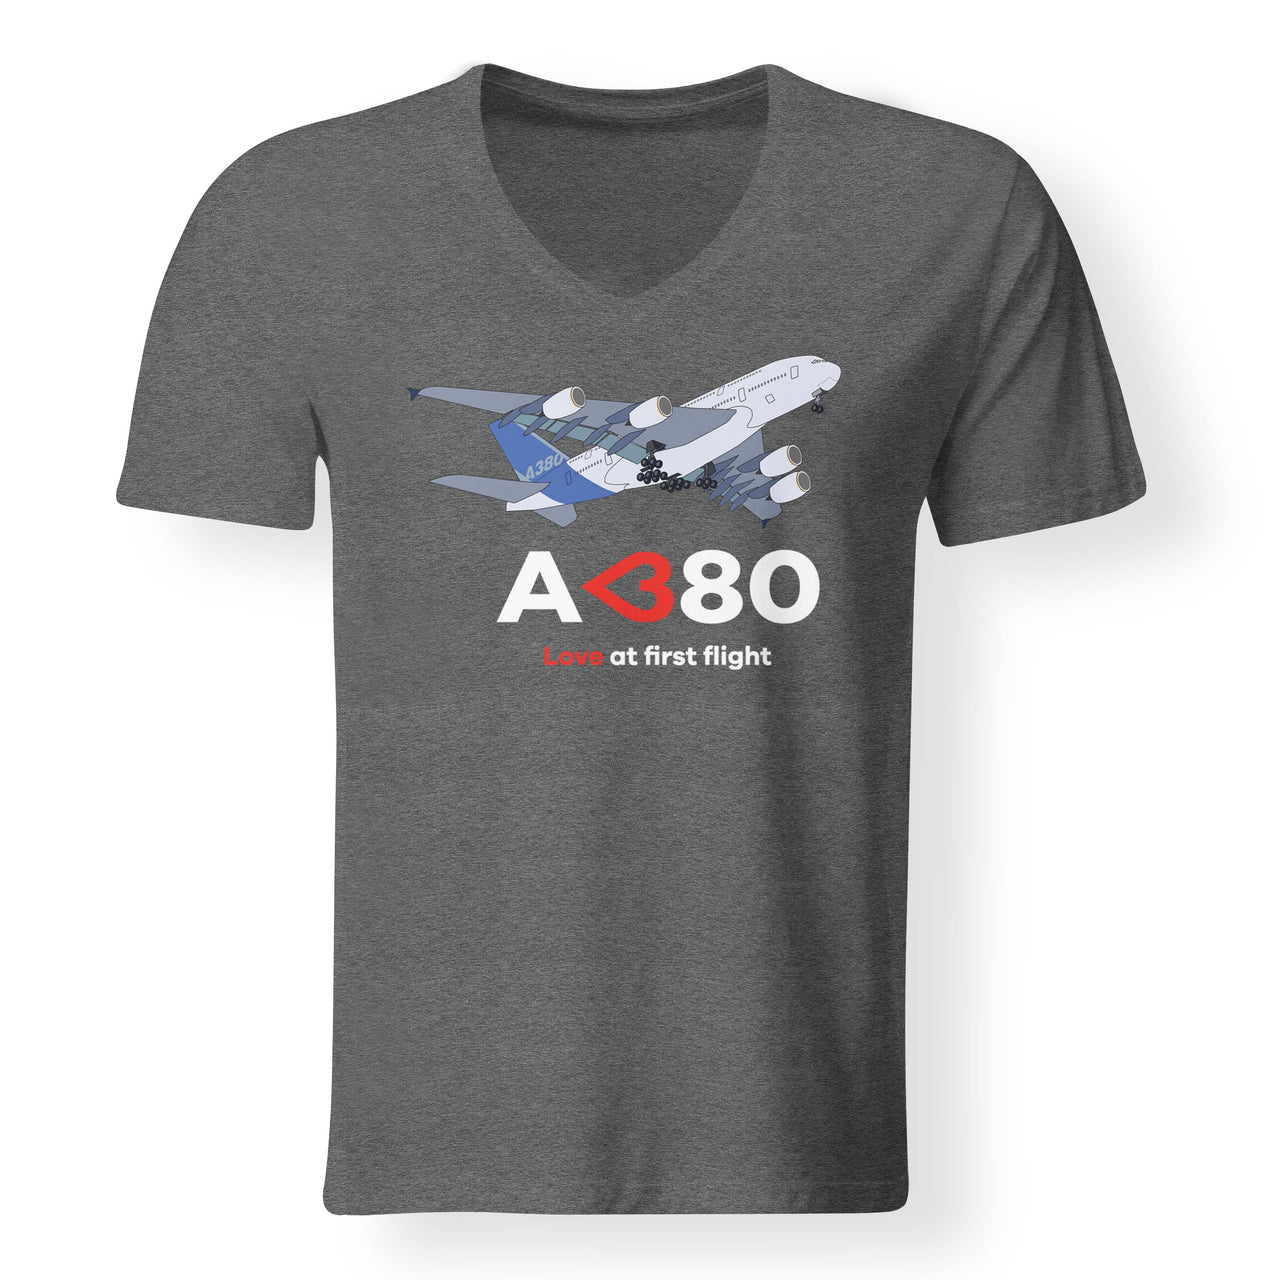 Airbus A380 Love at first flight Designed V-Neck T-Shirts